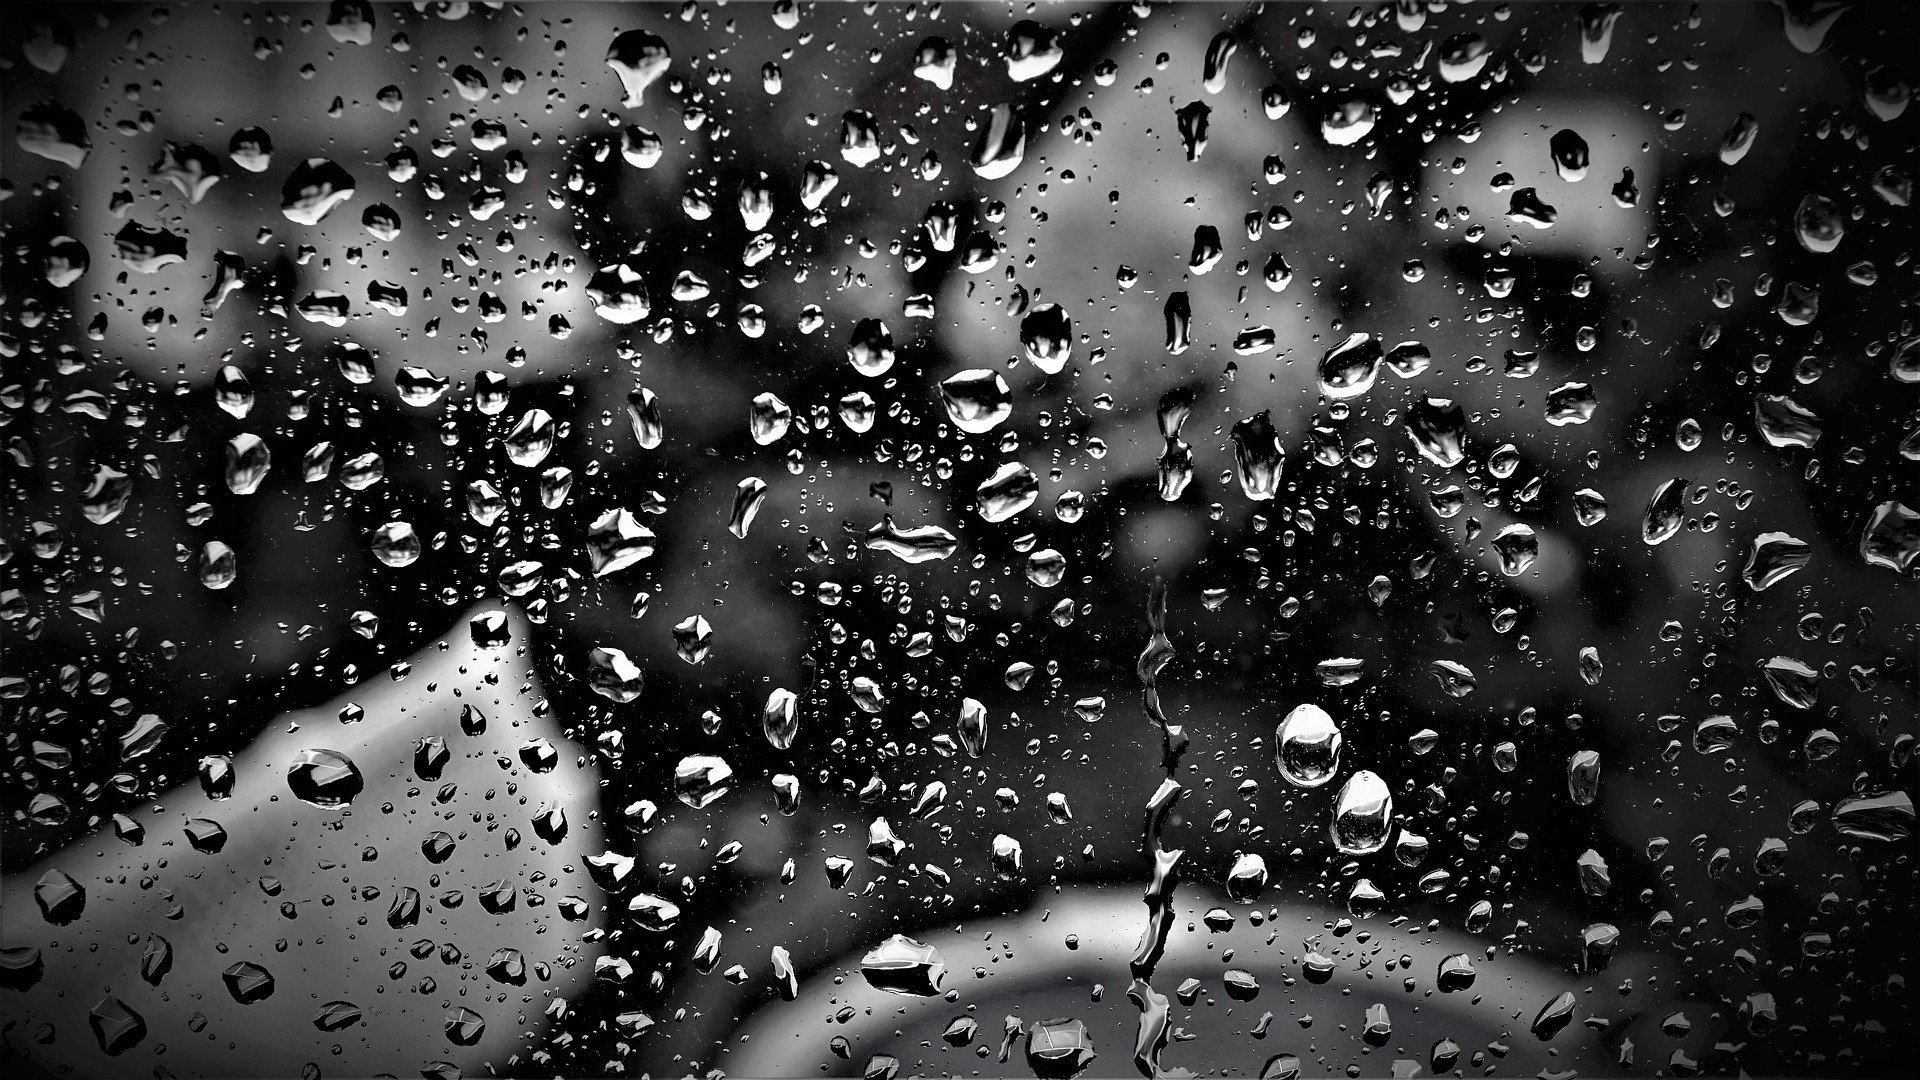 Water Drops on a Window with Black Background by Mylene2401